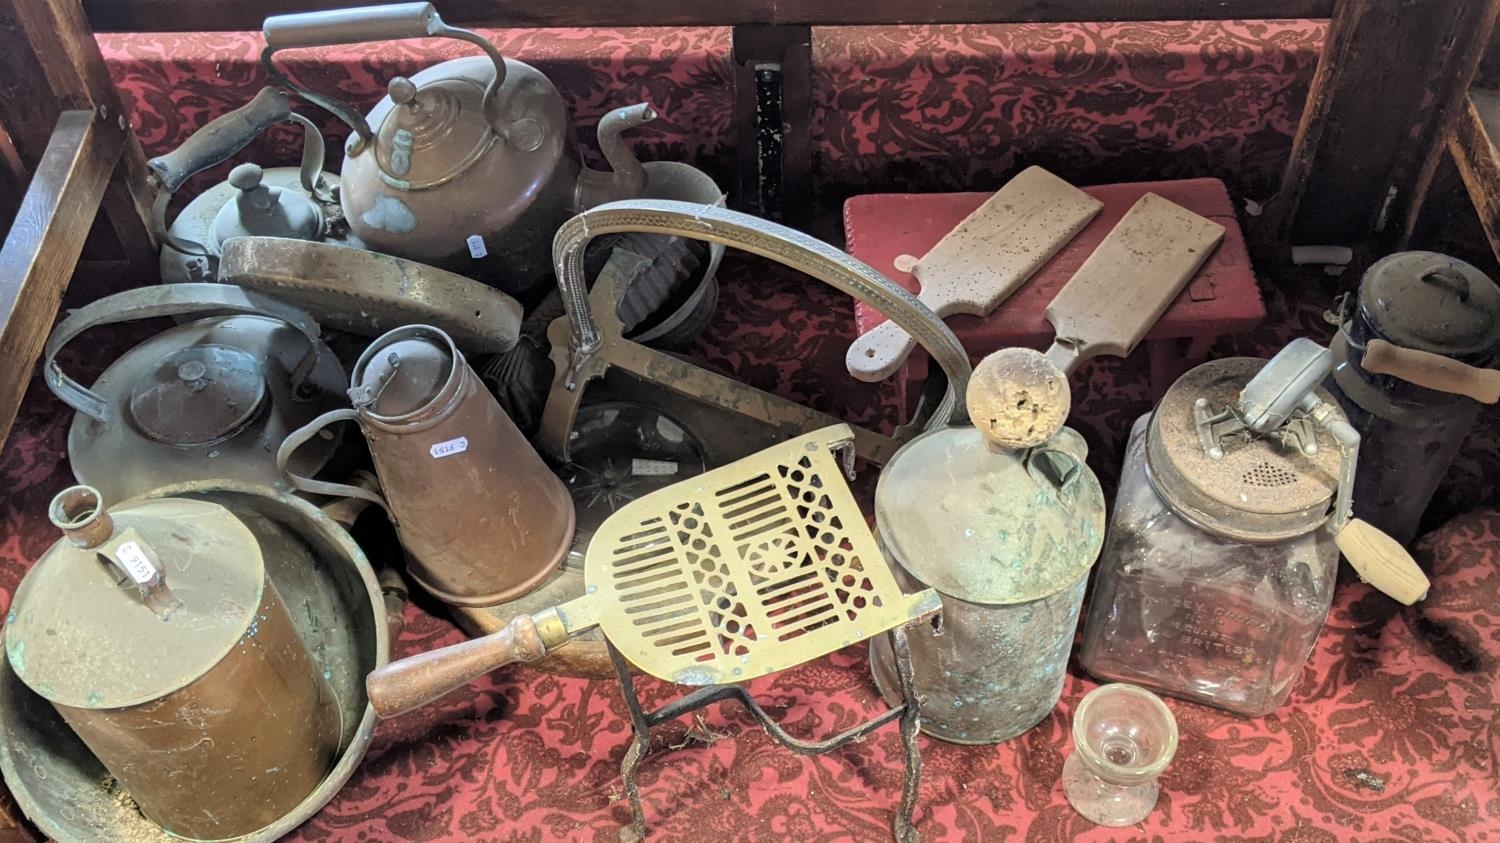 A collection of 19th century and other copperware including kettles, canisters, trivet, house